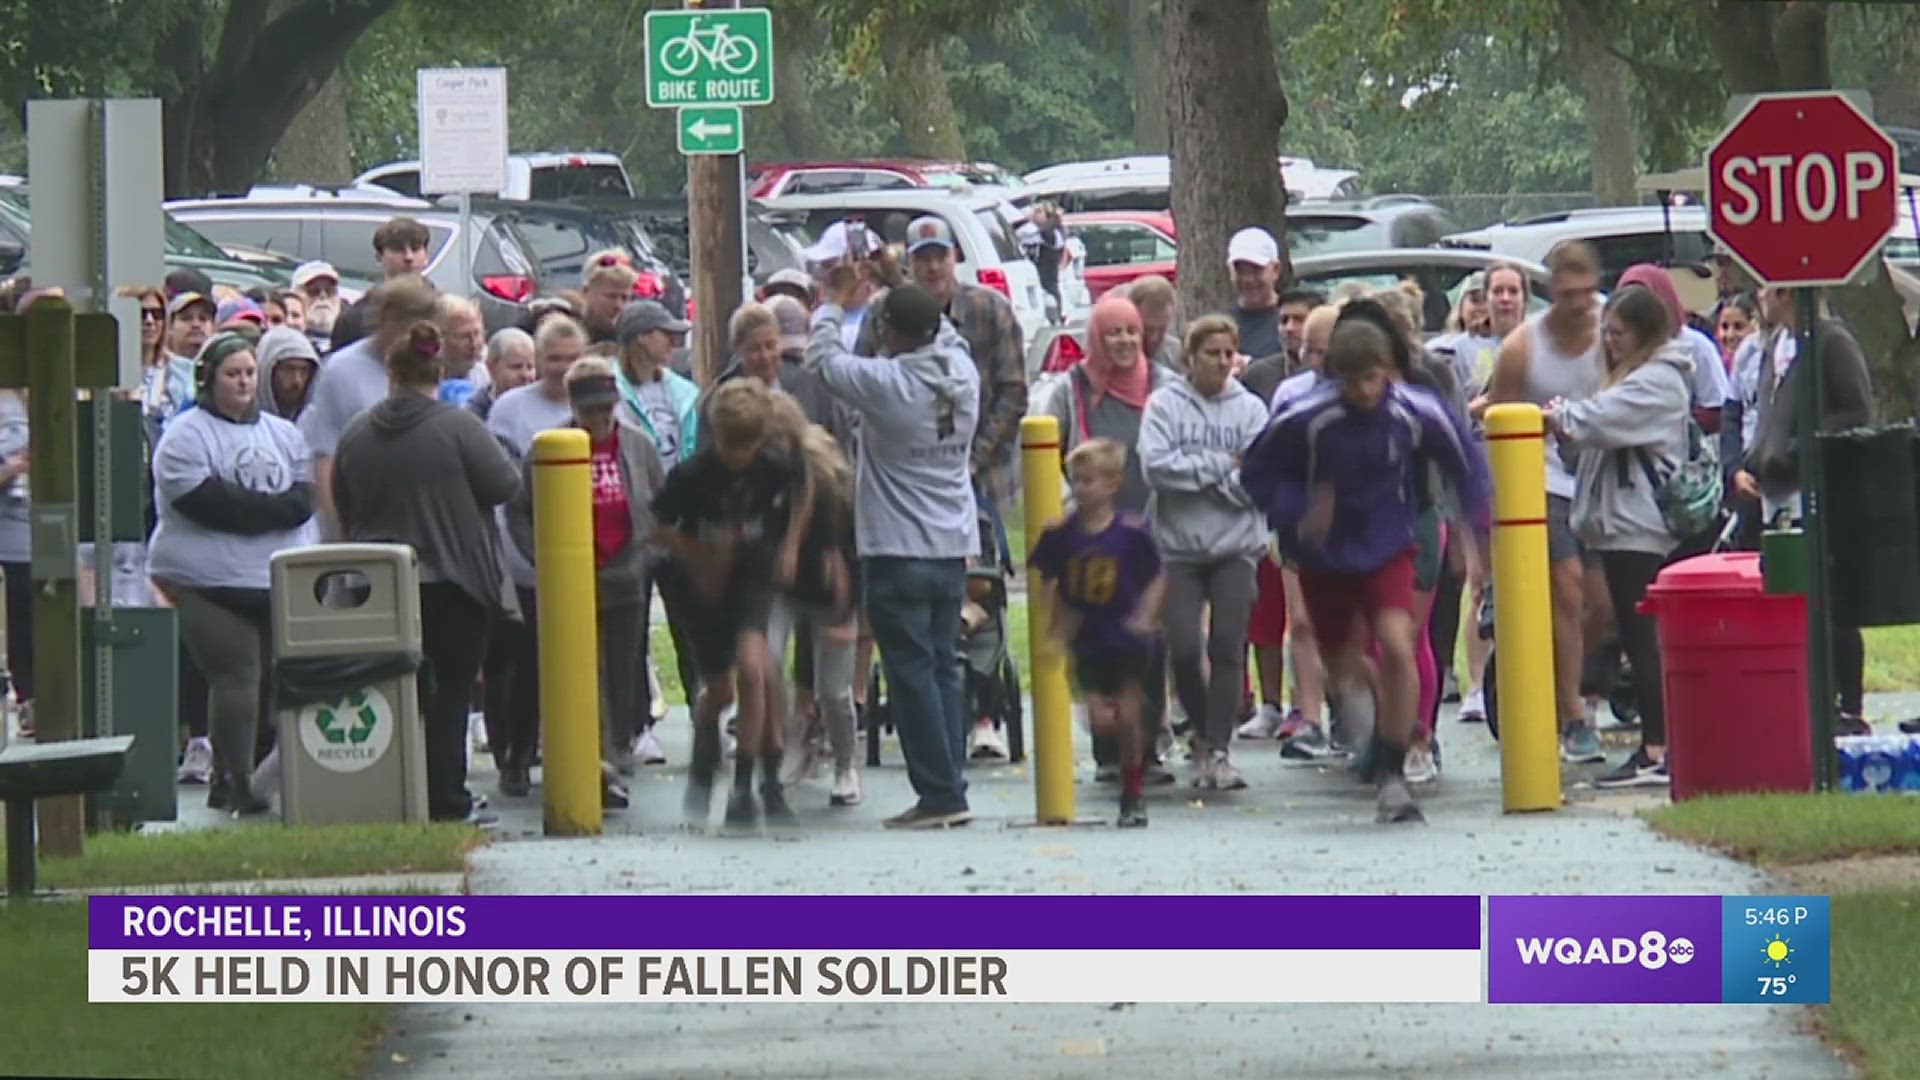 This marked the 5th annual run and walk to honor the 23-year-old who was found dead in Galesburg in 2018.